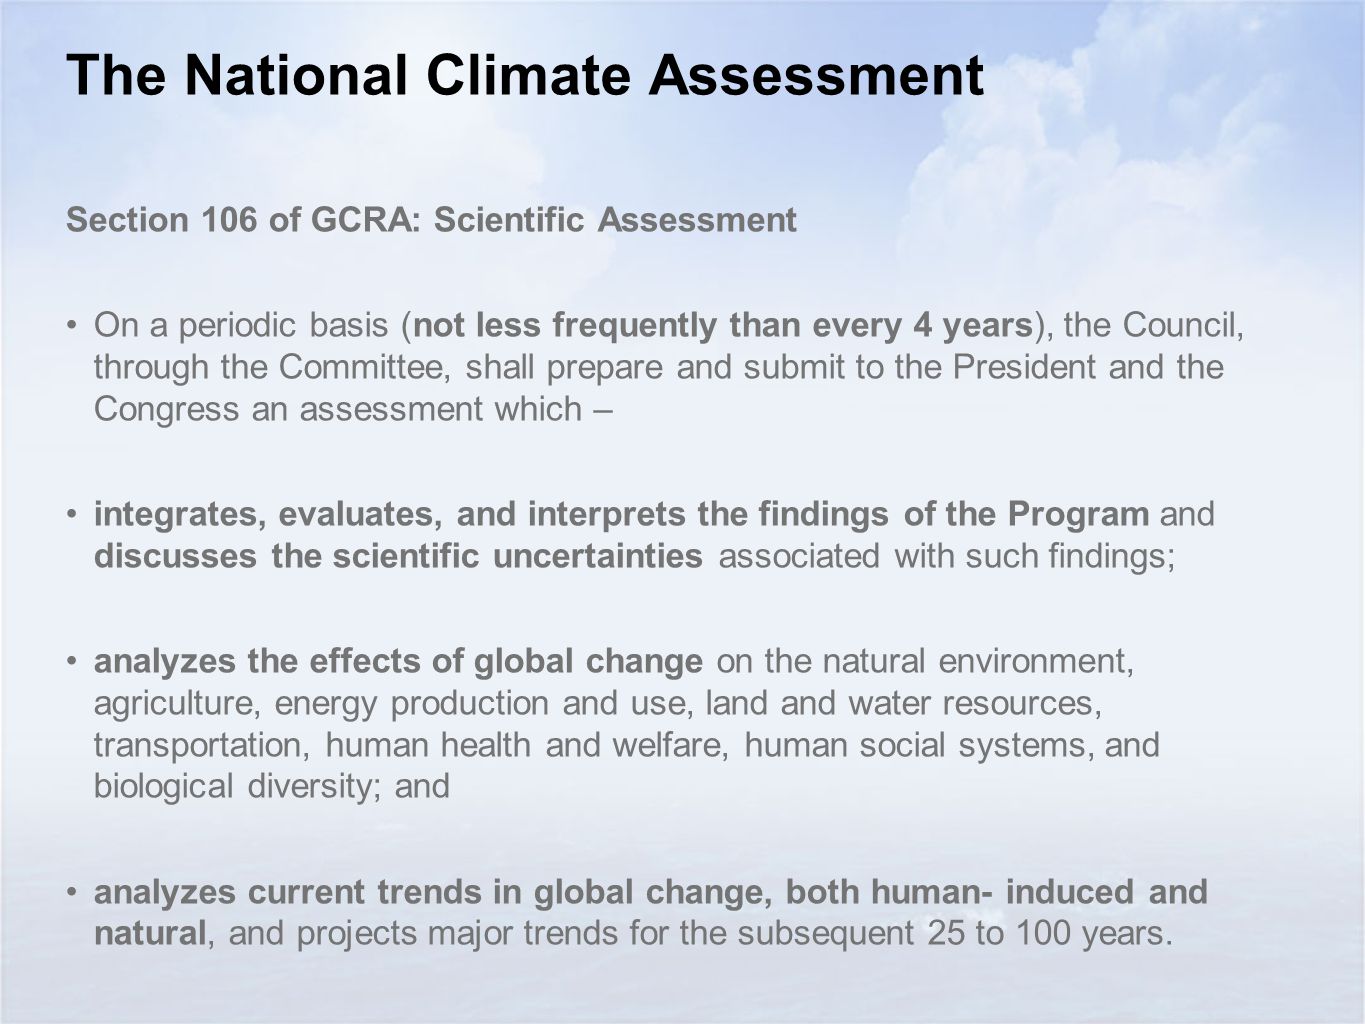 The National Climate Assessment Section 106 of GCRA: Scientific Assessment On a periodic basis (not less frequently than every 4 years), the Council, through the Committee, shall prepare and submit to the President and the Congress an assessment which – integrates, evaluates, and interprets the findings of the Program and discusses the scientific uncertainties associated with such findings; analyzes the effects of global change on the natural environment, agriculture, energy production and use, land and water resources, transportation, human health and welfare, human social systems, and biological diversity; and analyzes current trends in global change, both human- induced and natural, and projects major trends for the subsequent 25 to 100 years.